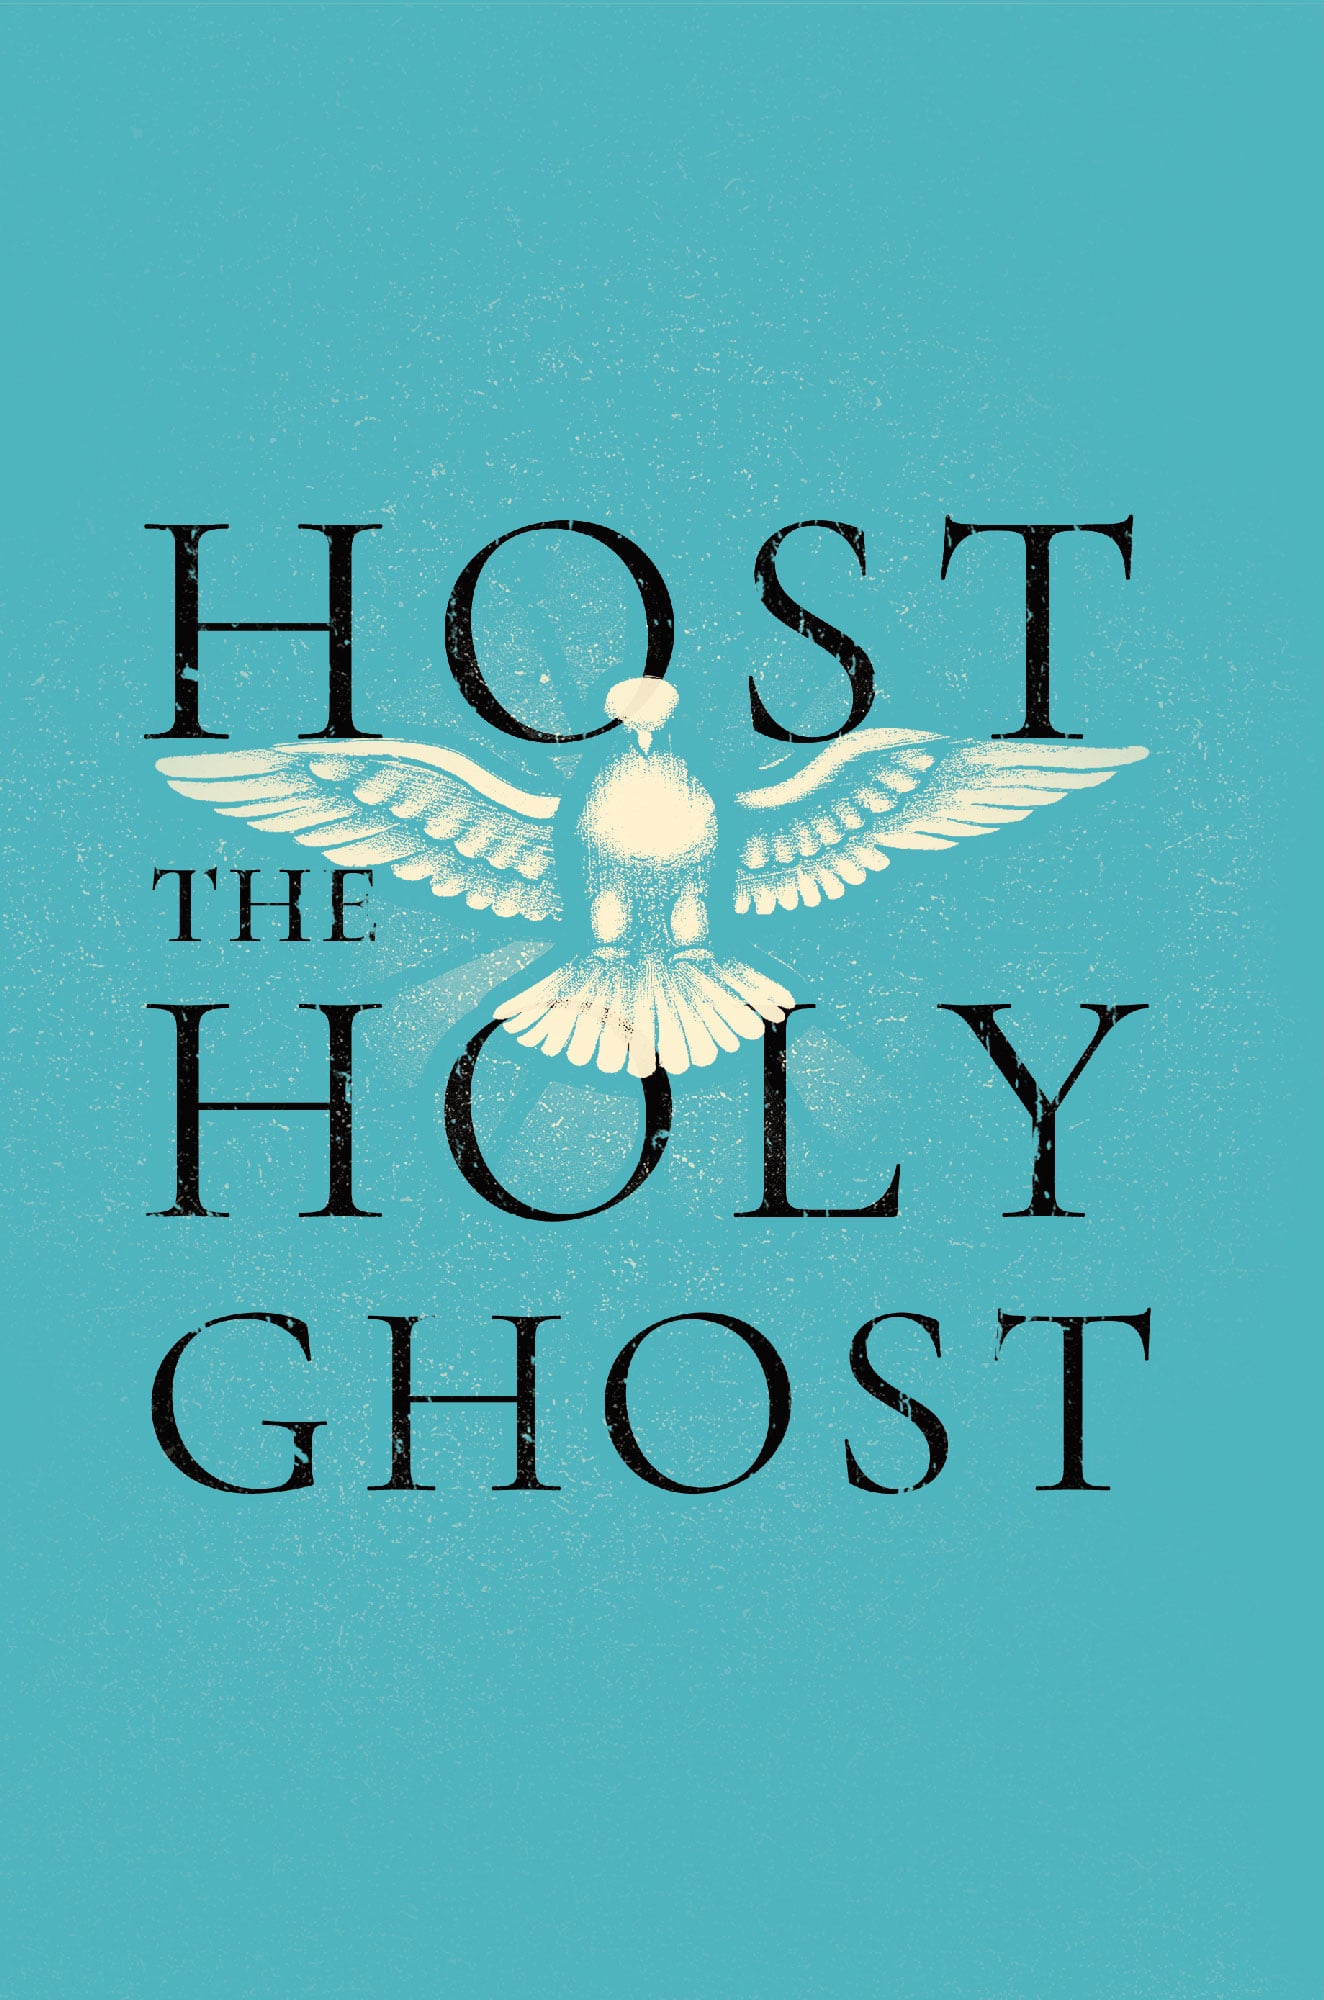 resource - Host the Holy Ghost